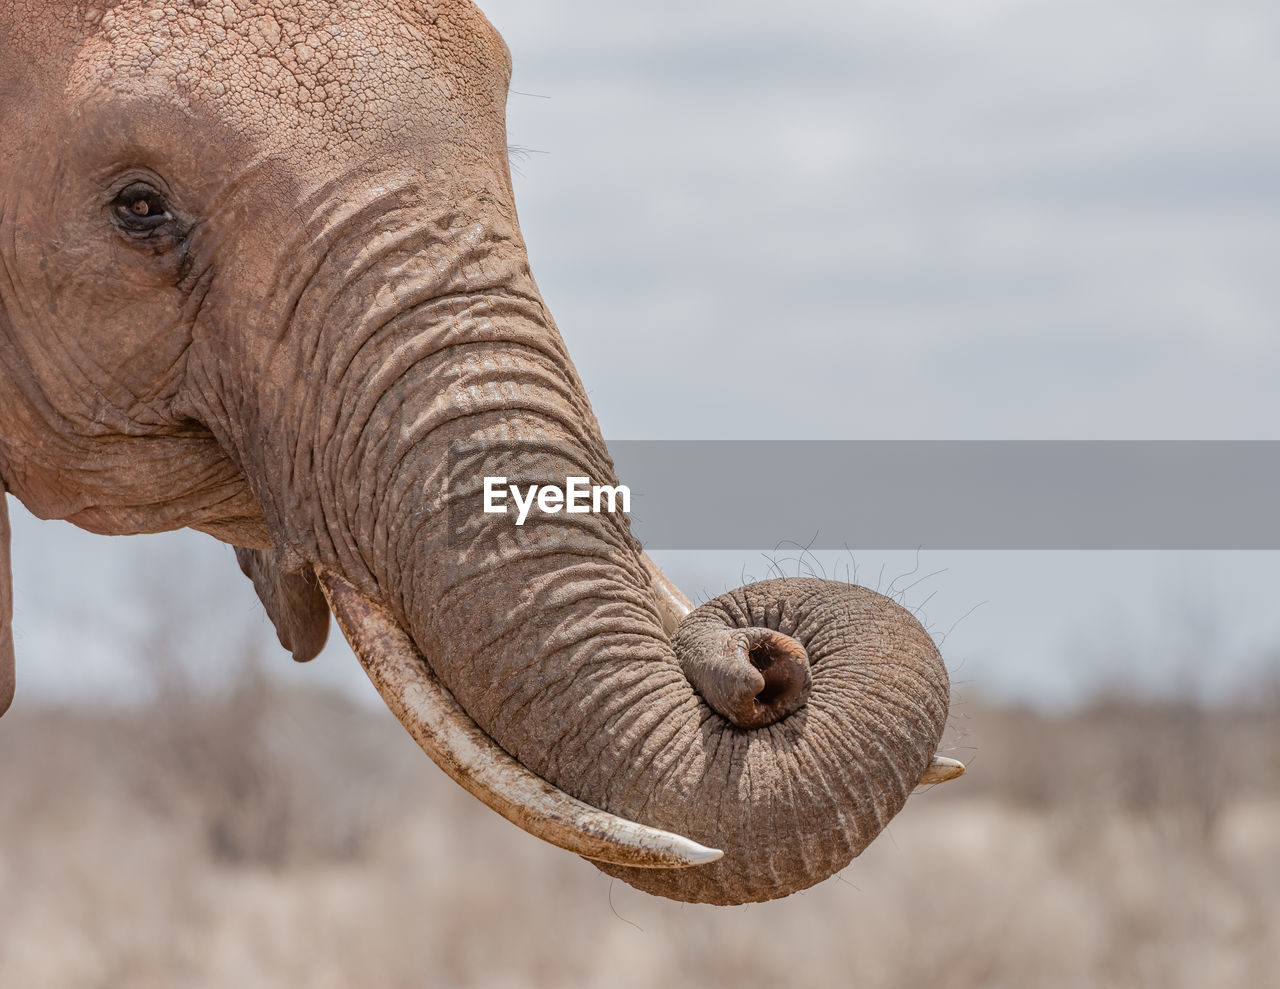 Rest the trunk on the elephants tusks